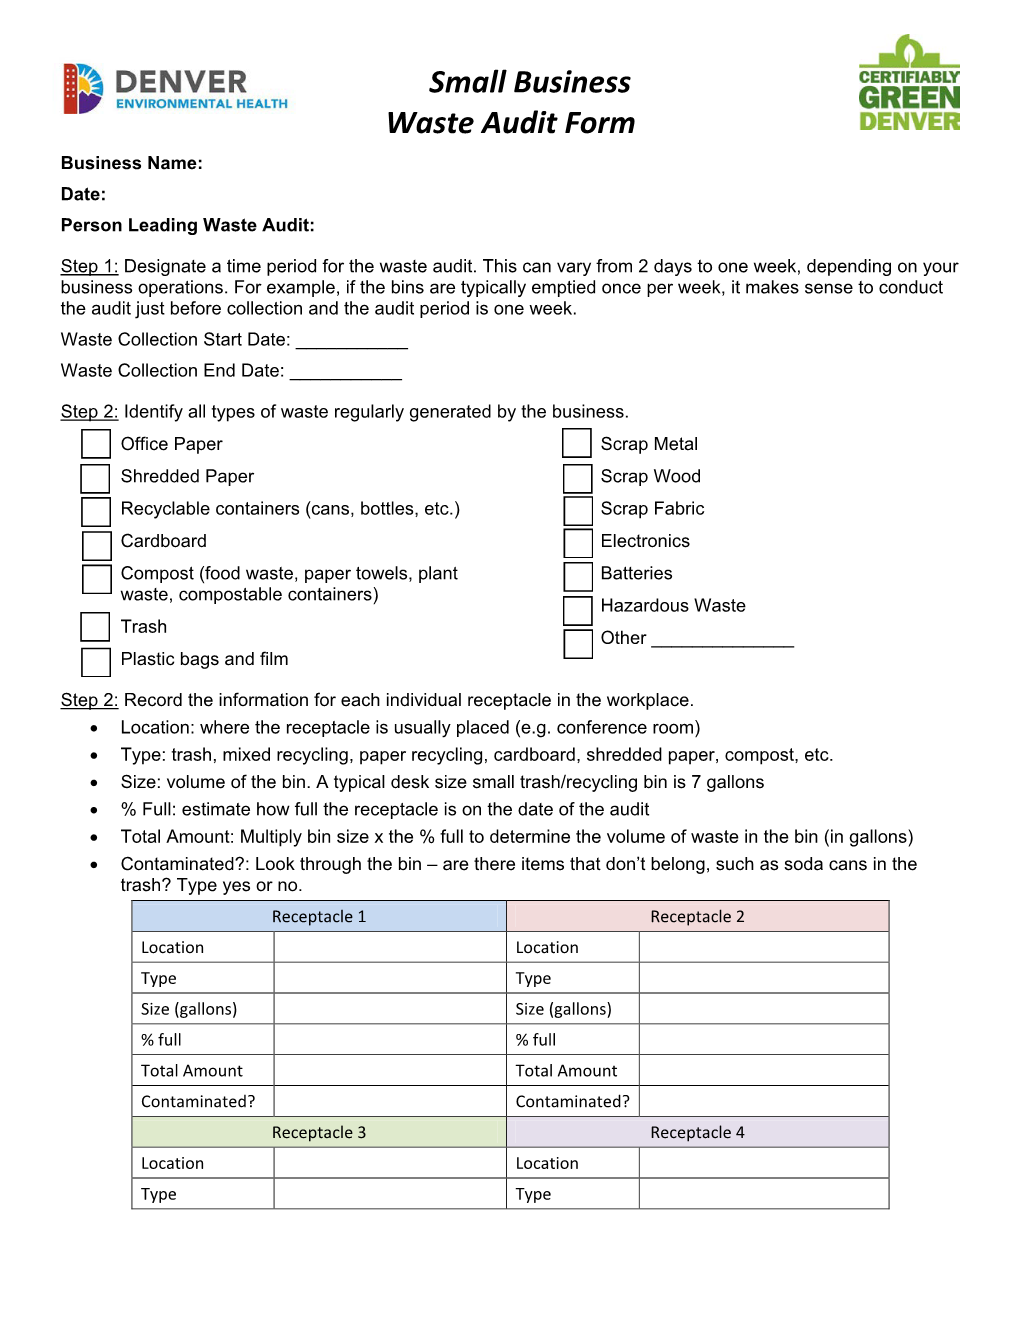 Small Business Waste Audit Form Business Name: Date: Person Leading Waste Audit